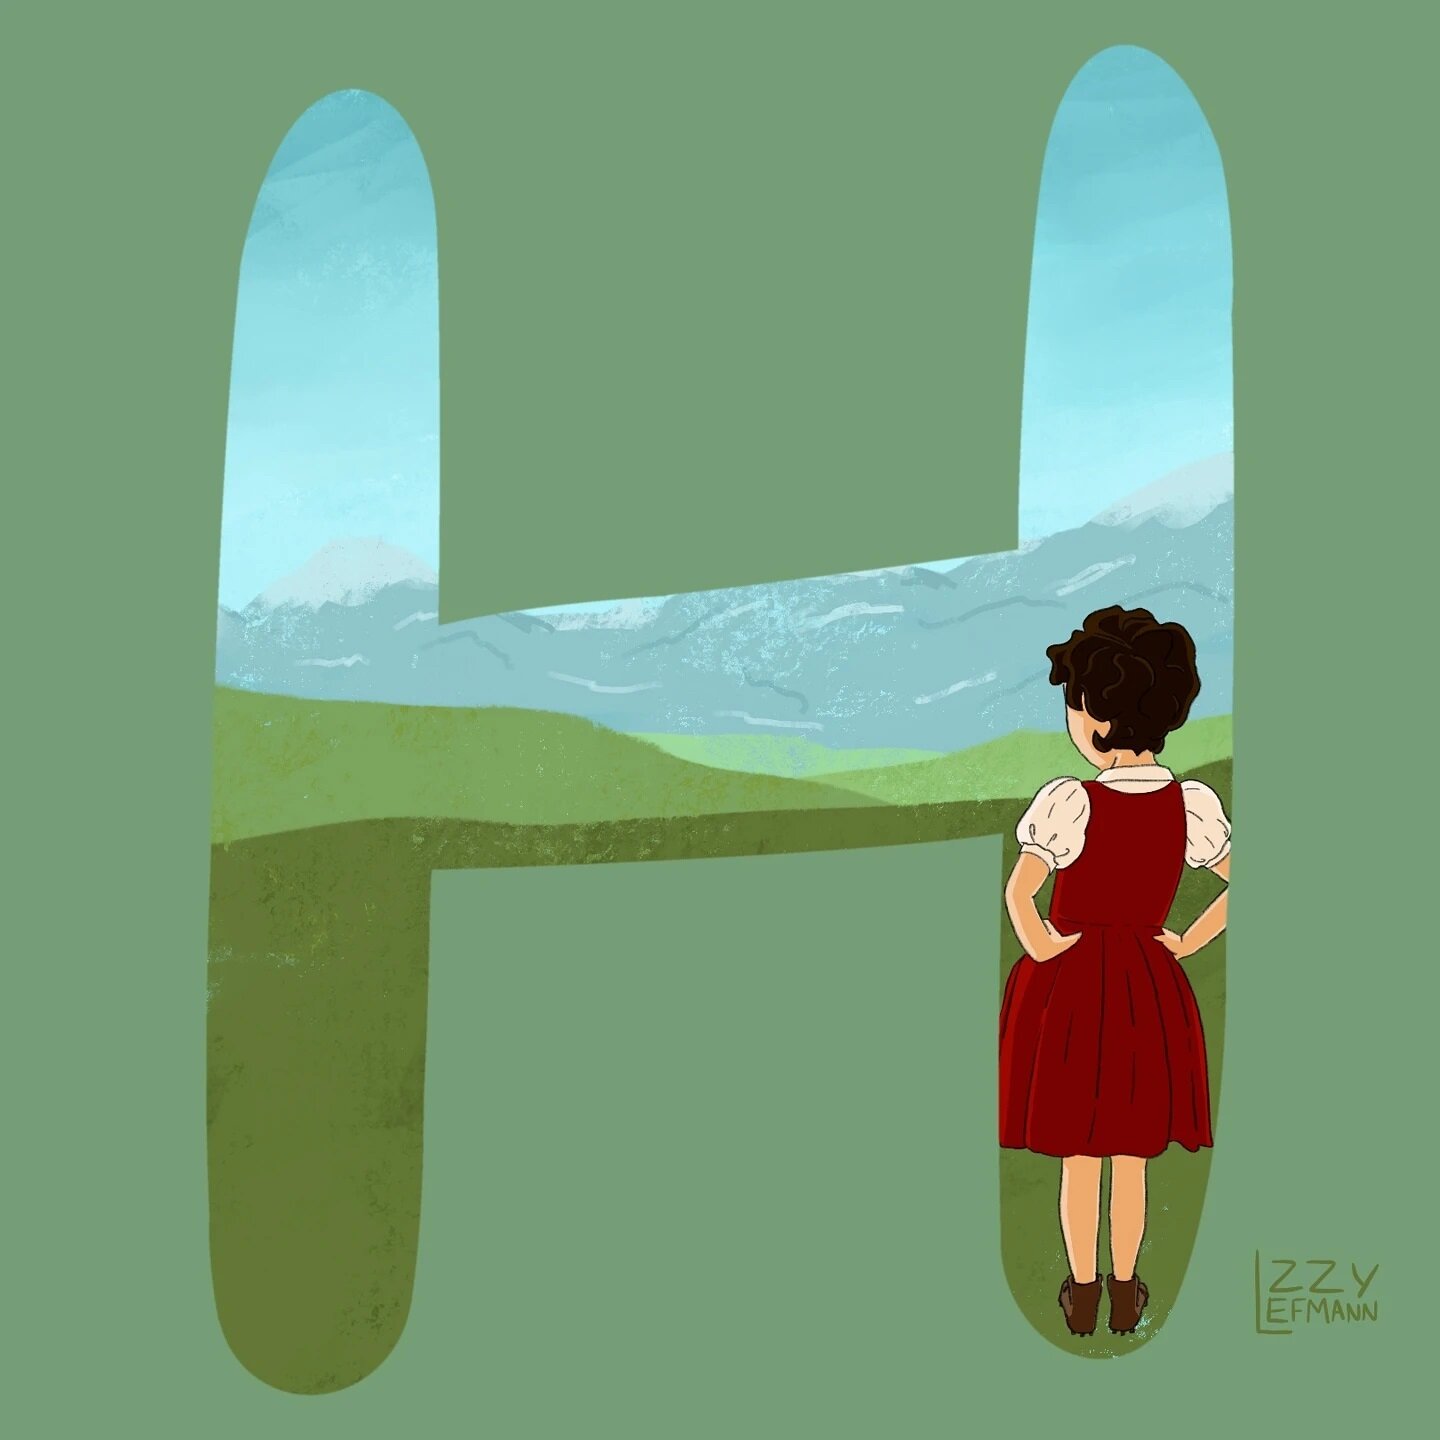 H is for Heidi! I don't remember reading these books, but my childminder growing up was called Heidy and had a big collection.
.
I took a long break away from drawing after losing my dad. I'm now slowly coming back to my wonderful alphabet.
.
#illust